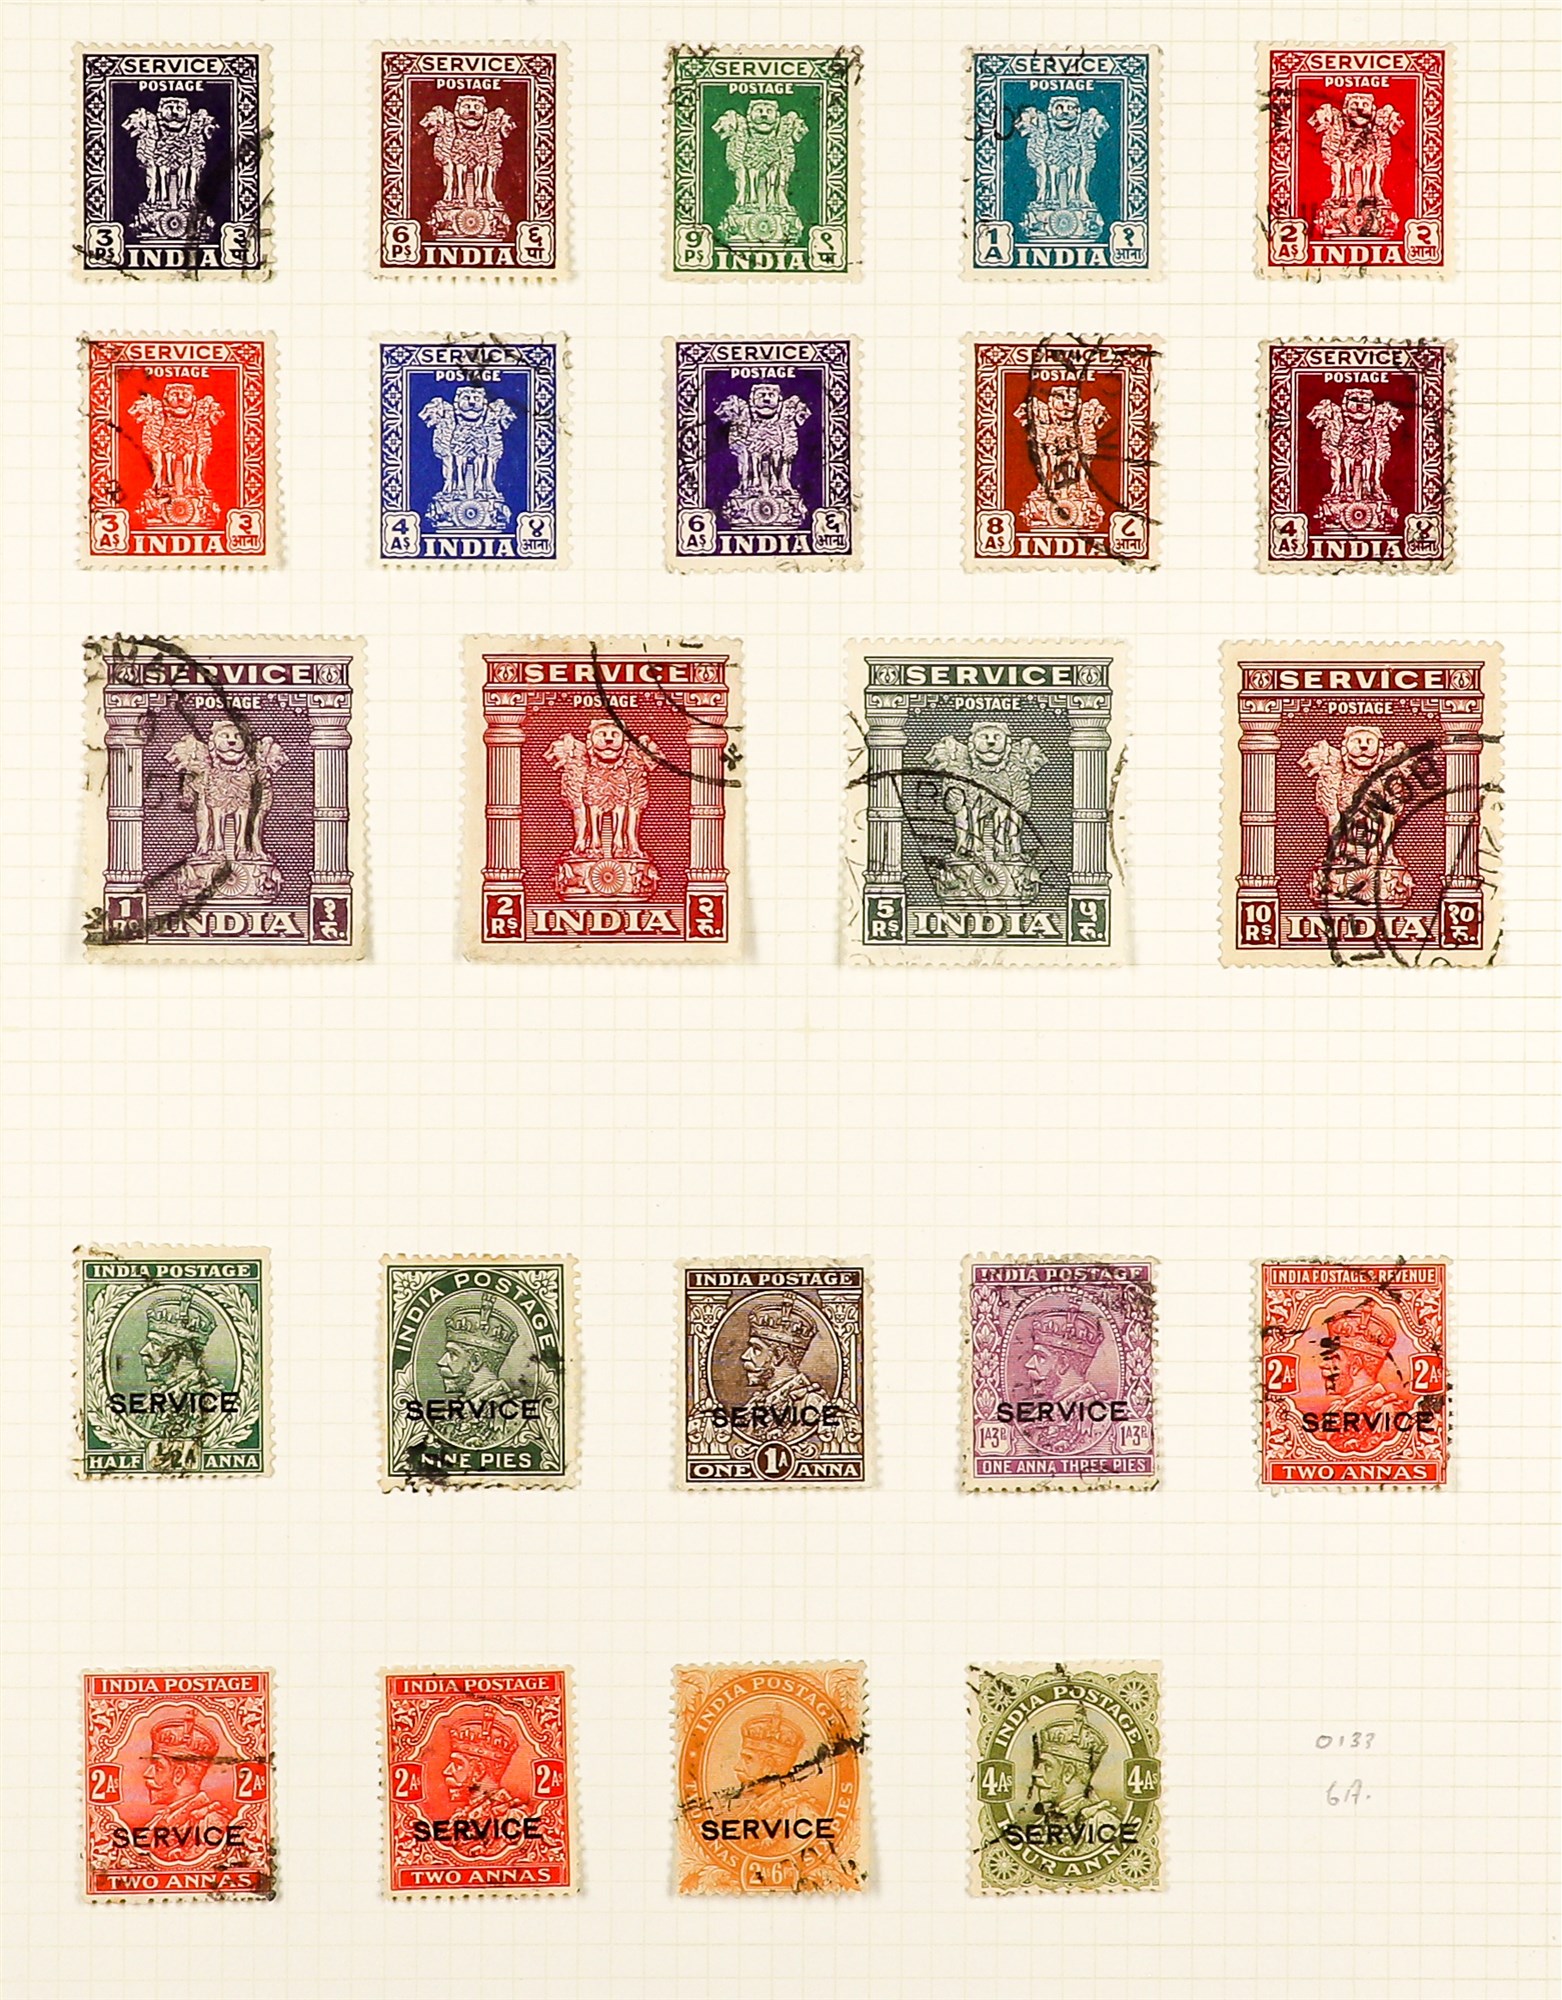 INDIA 1854 - 1952 USED COLLECTION of 400+ stamps on pages, note 1854-55 ½a (2), 1a (5), 2a (3) & 4a, - Image 26 of 27